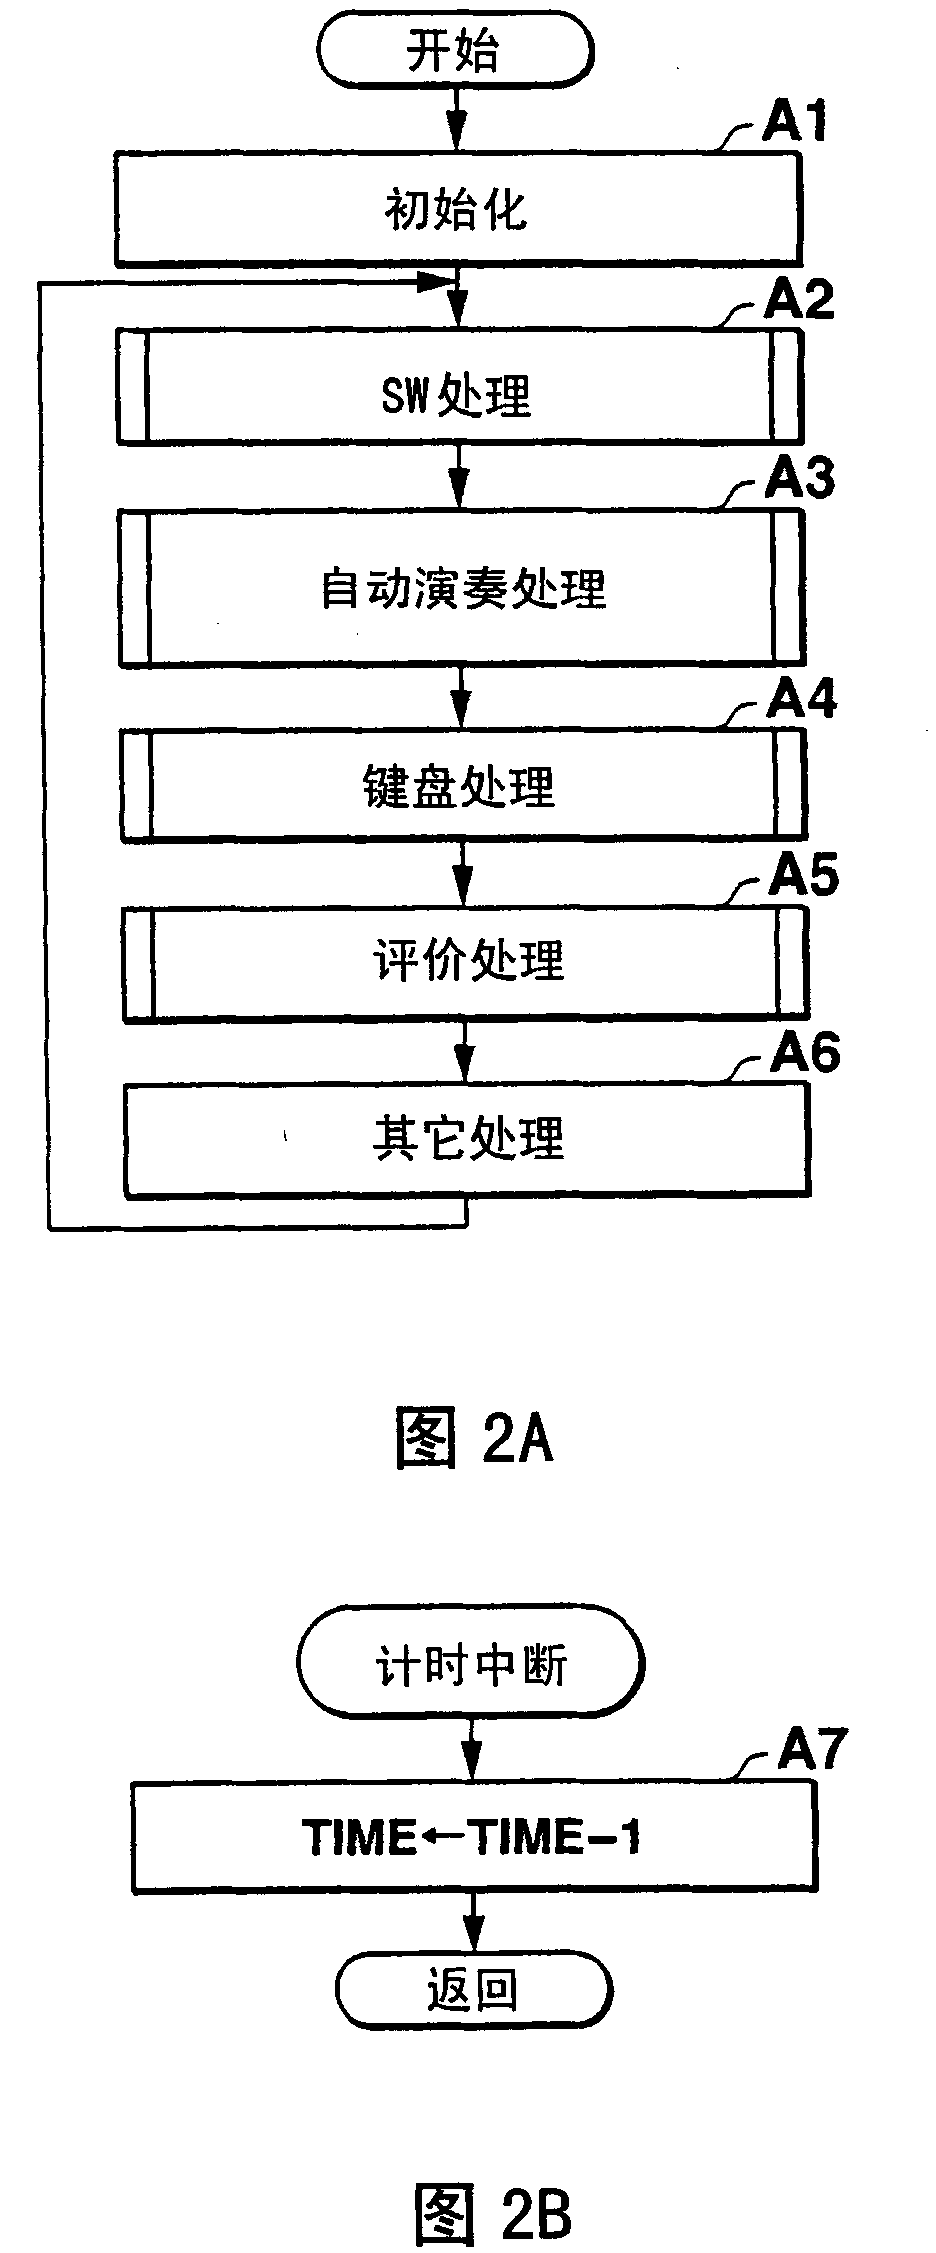 Device for musical performance evaluation